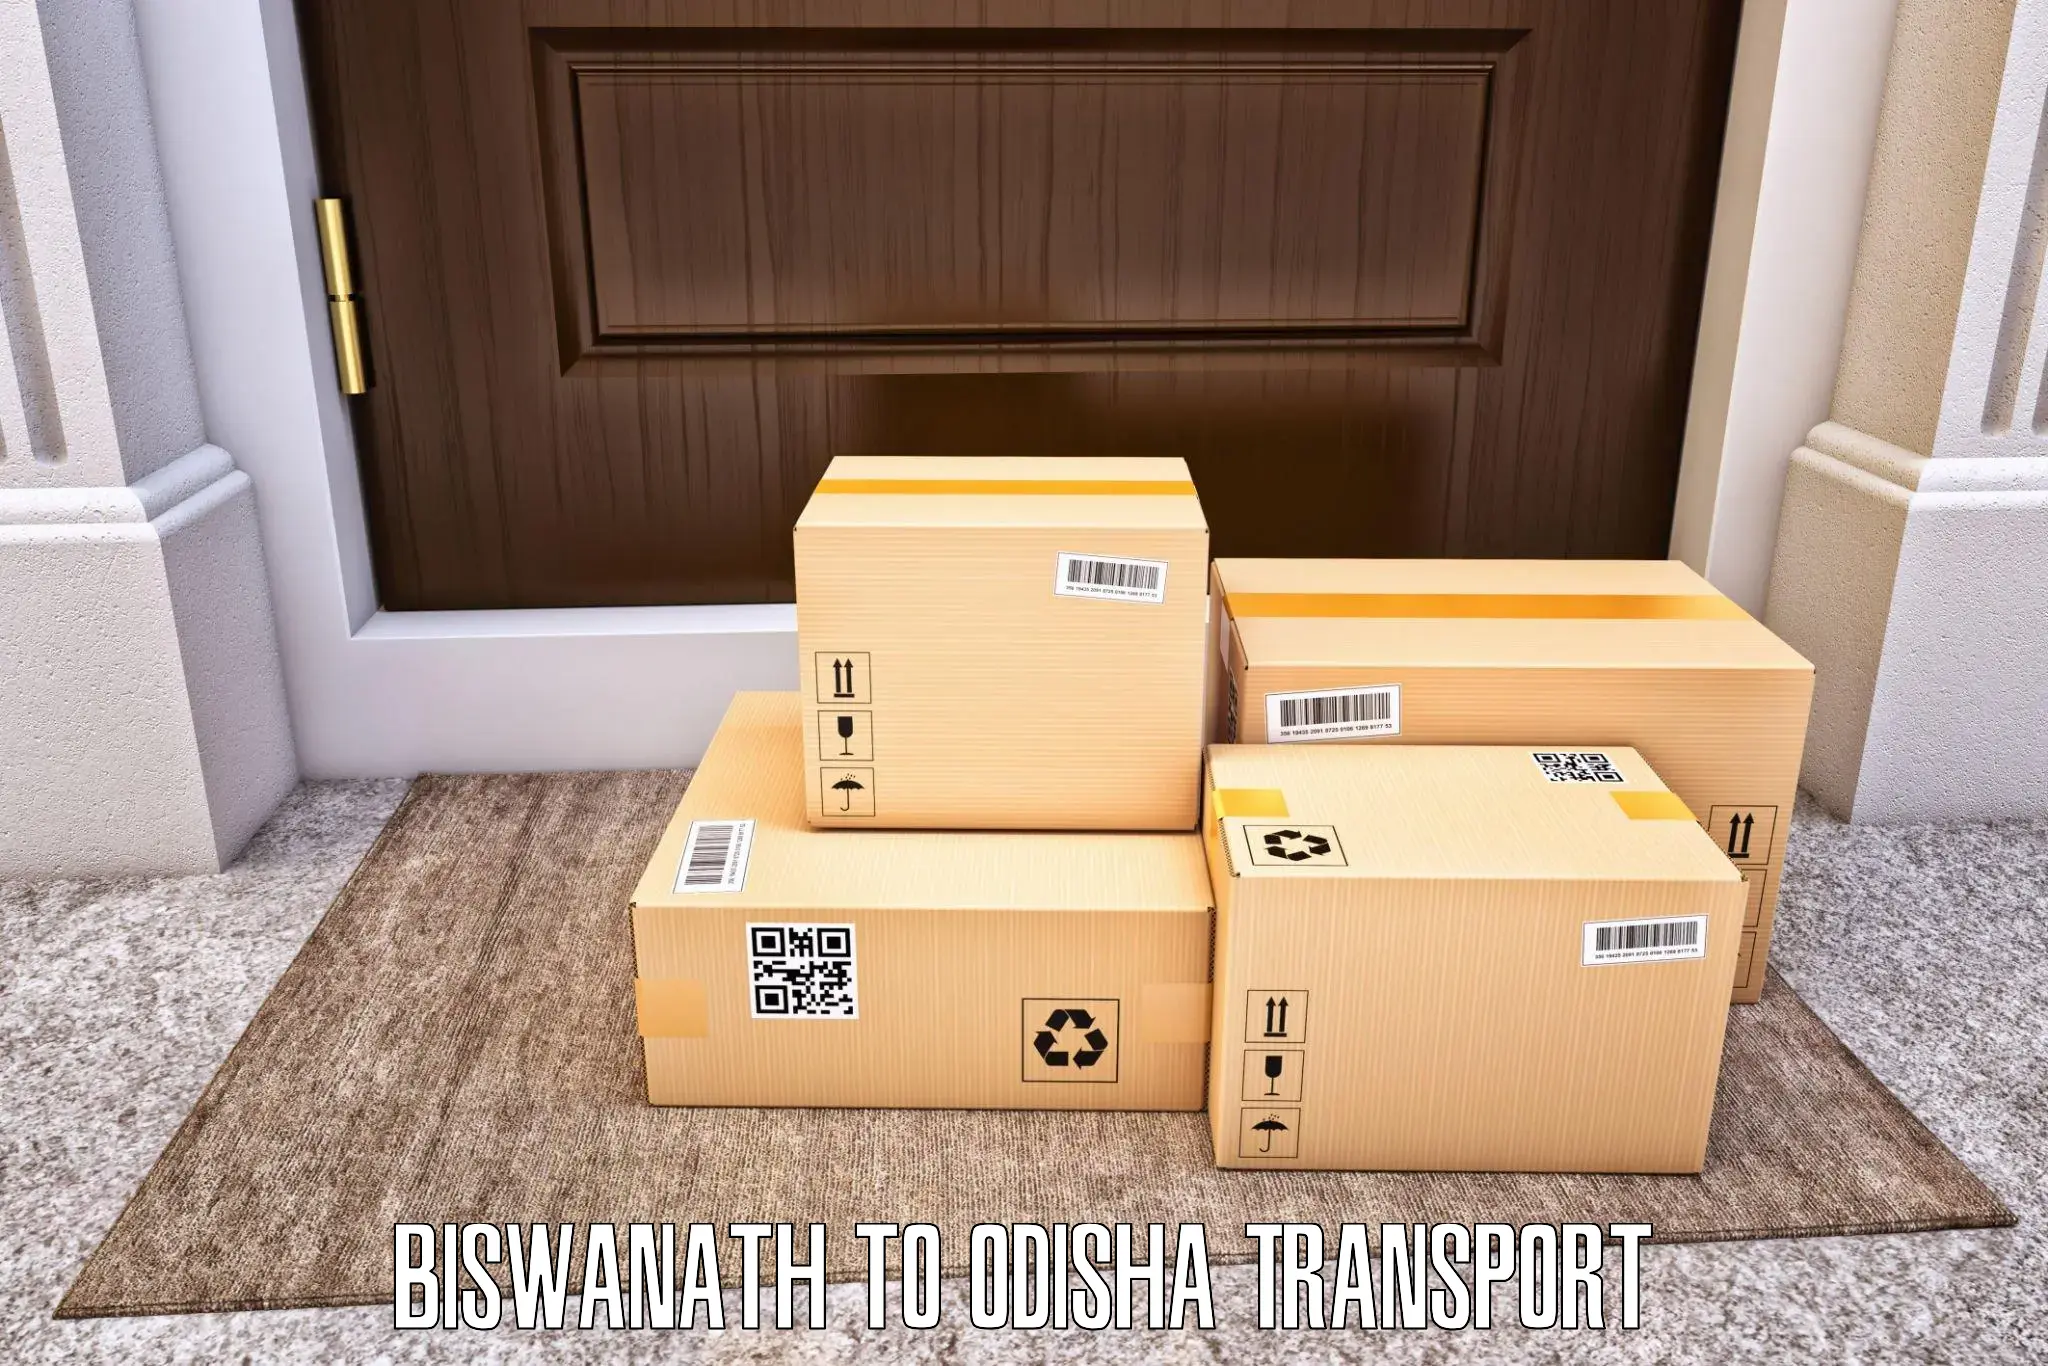 Online transport booking Biswanath to Mohana